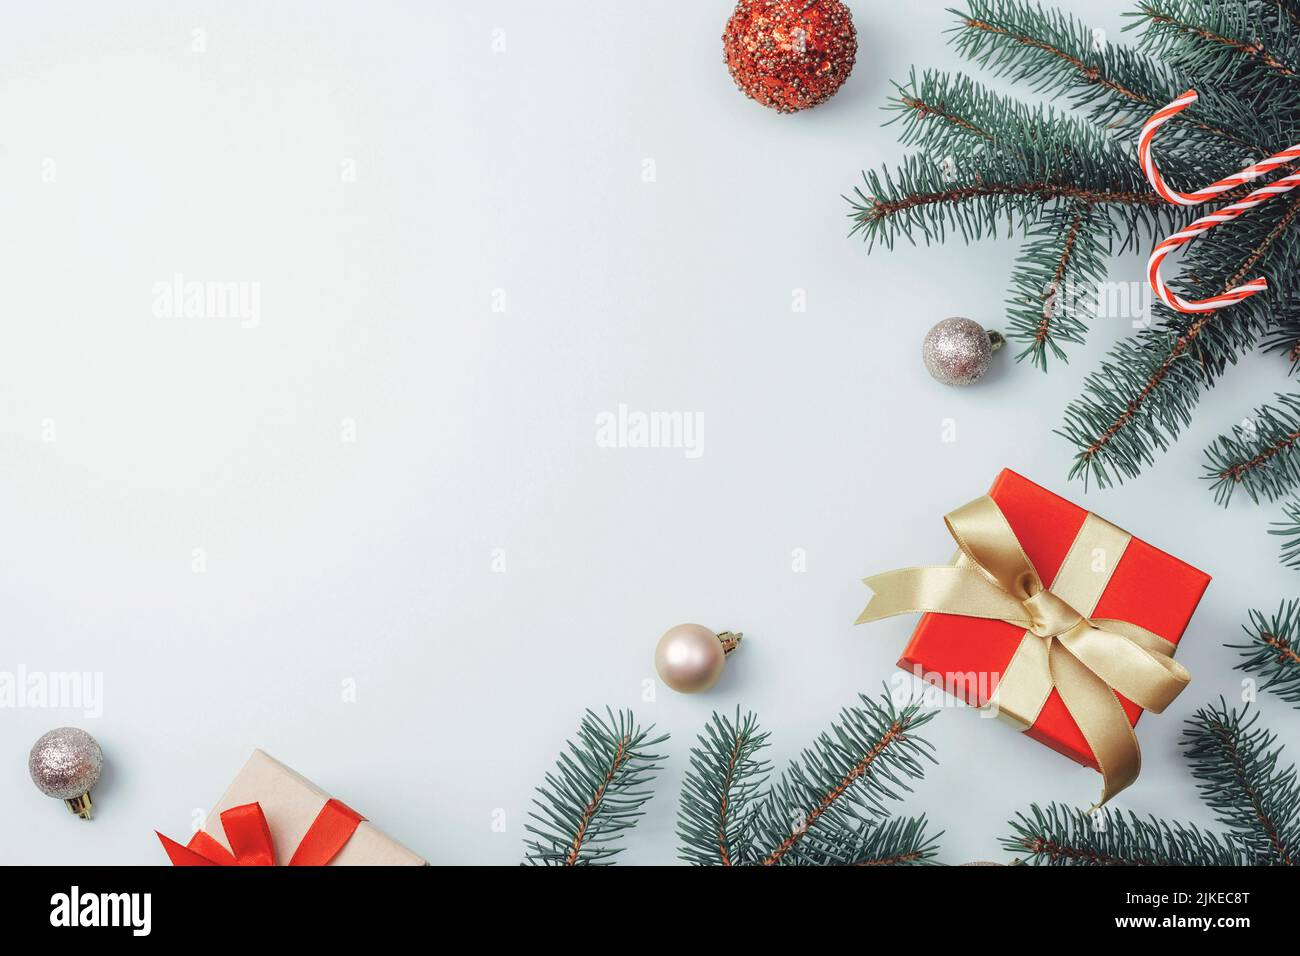 Christmas decorations, gift boxes, fir branches and candy cane on light background. Top view, flat lay, copy space. Stock Photo